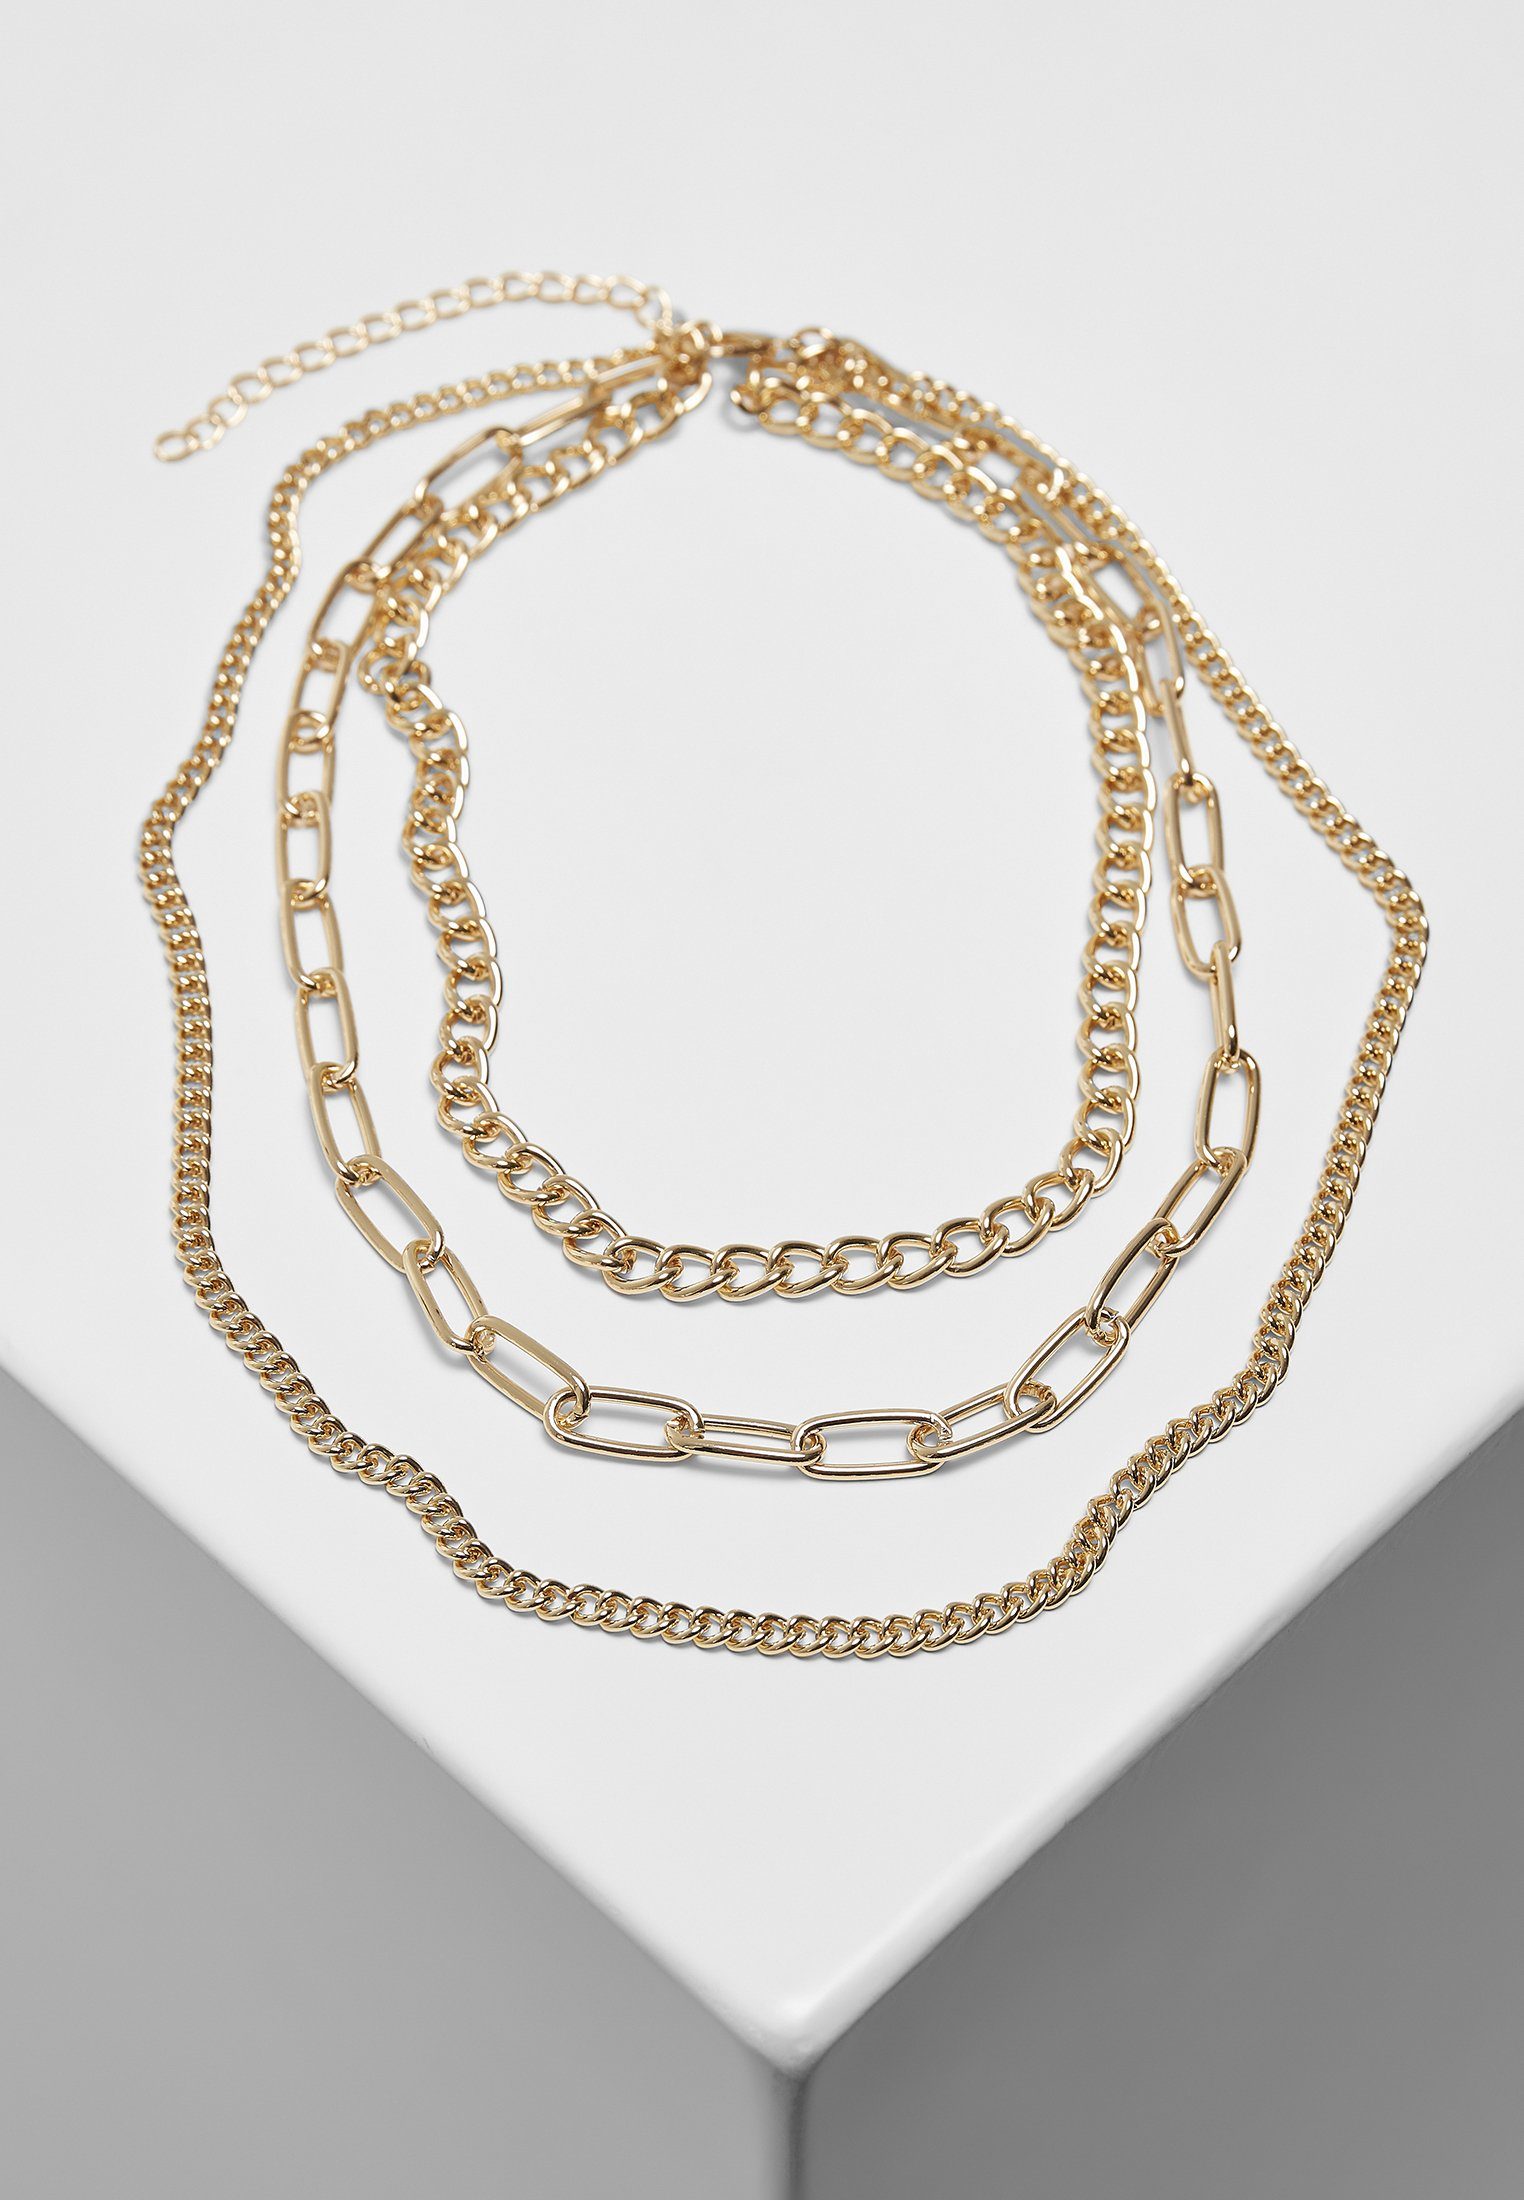 URBAN CLASSICS Edelstahlkette Accessoires Layering Chain Necklace gold | Armbänder